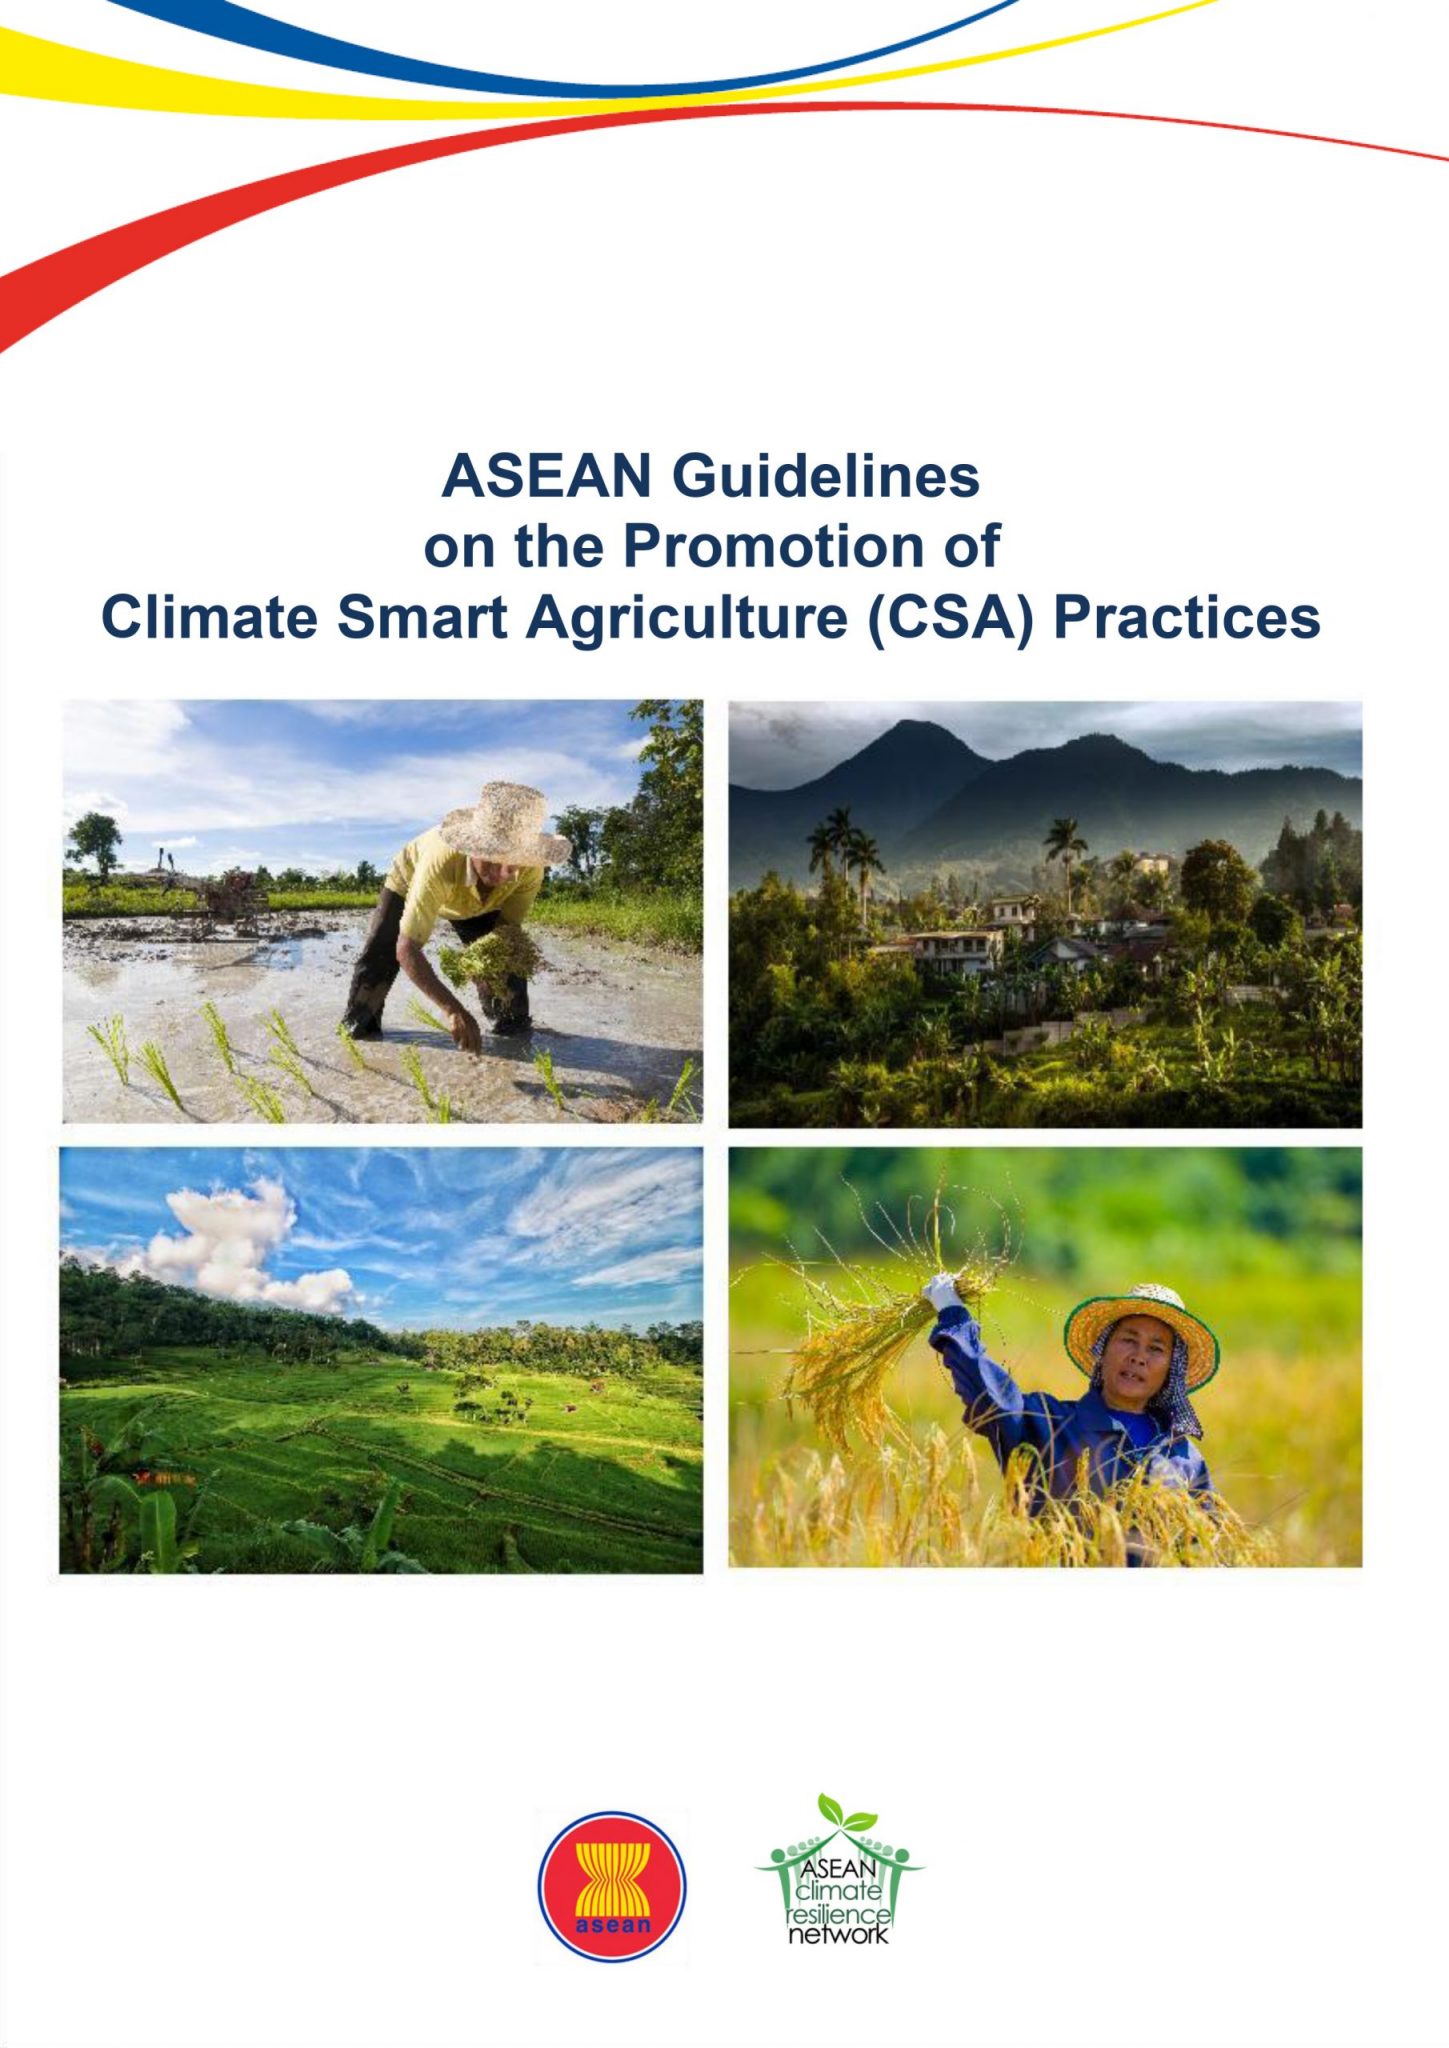 vision and strategic plan for asean cooperation in food agriculture and forestry